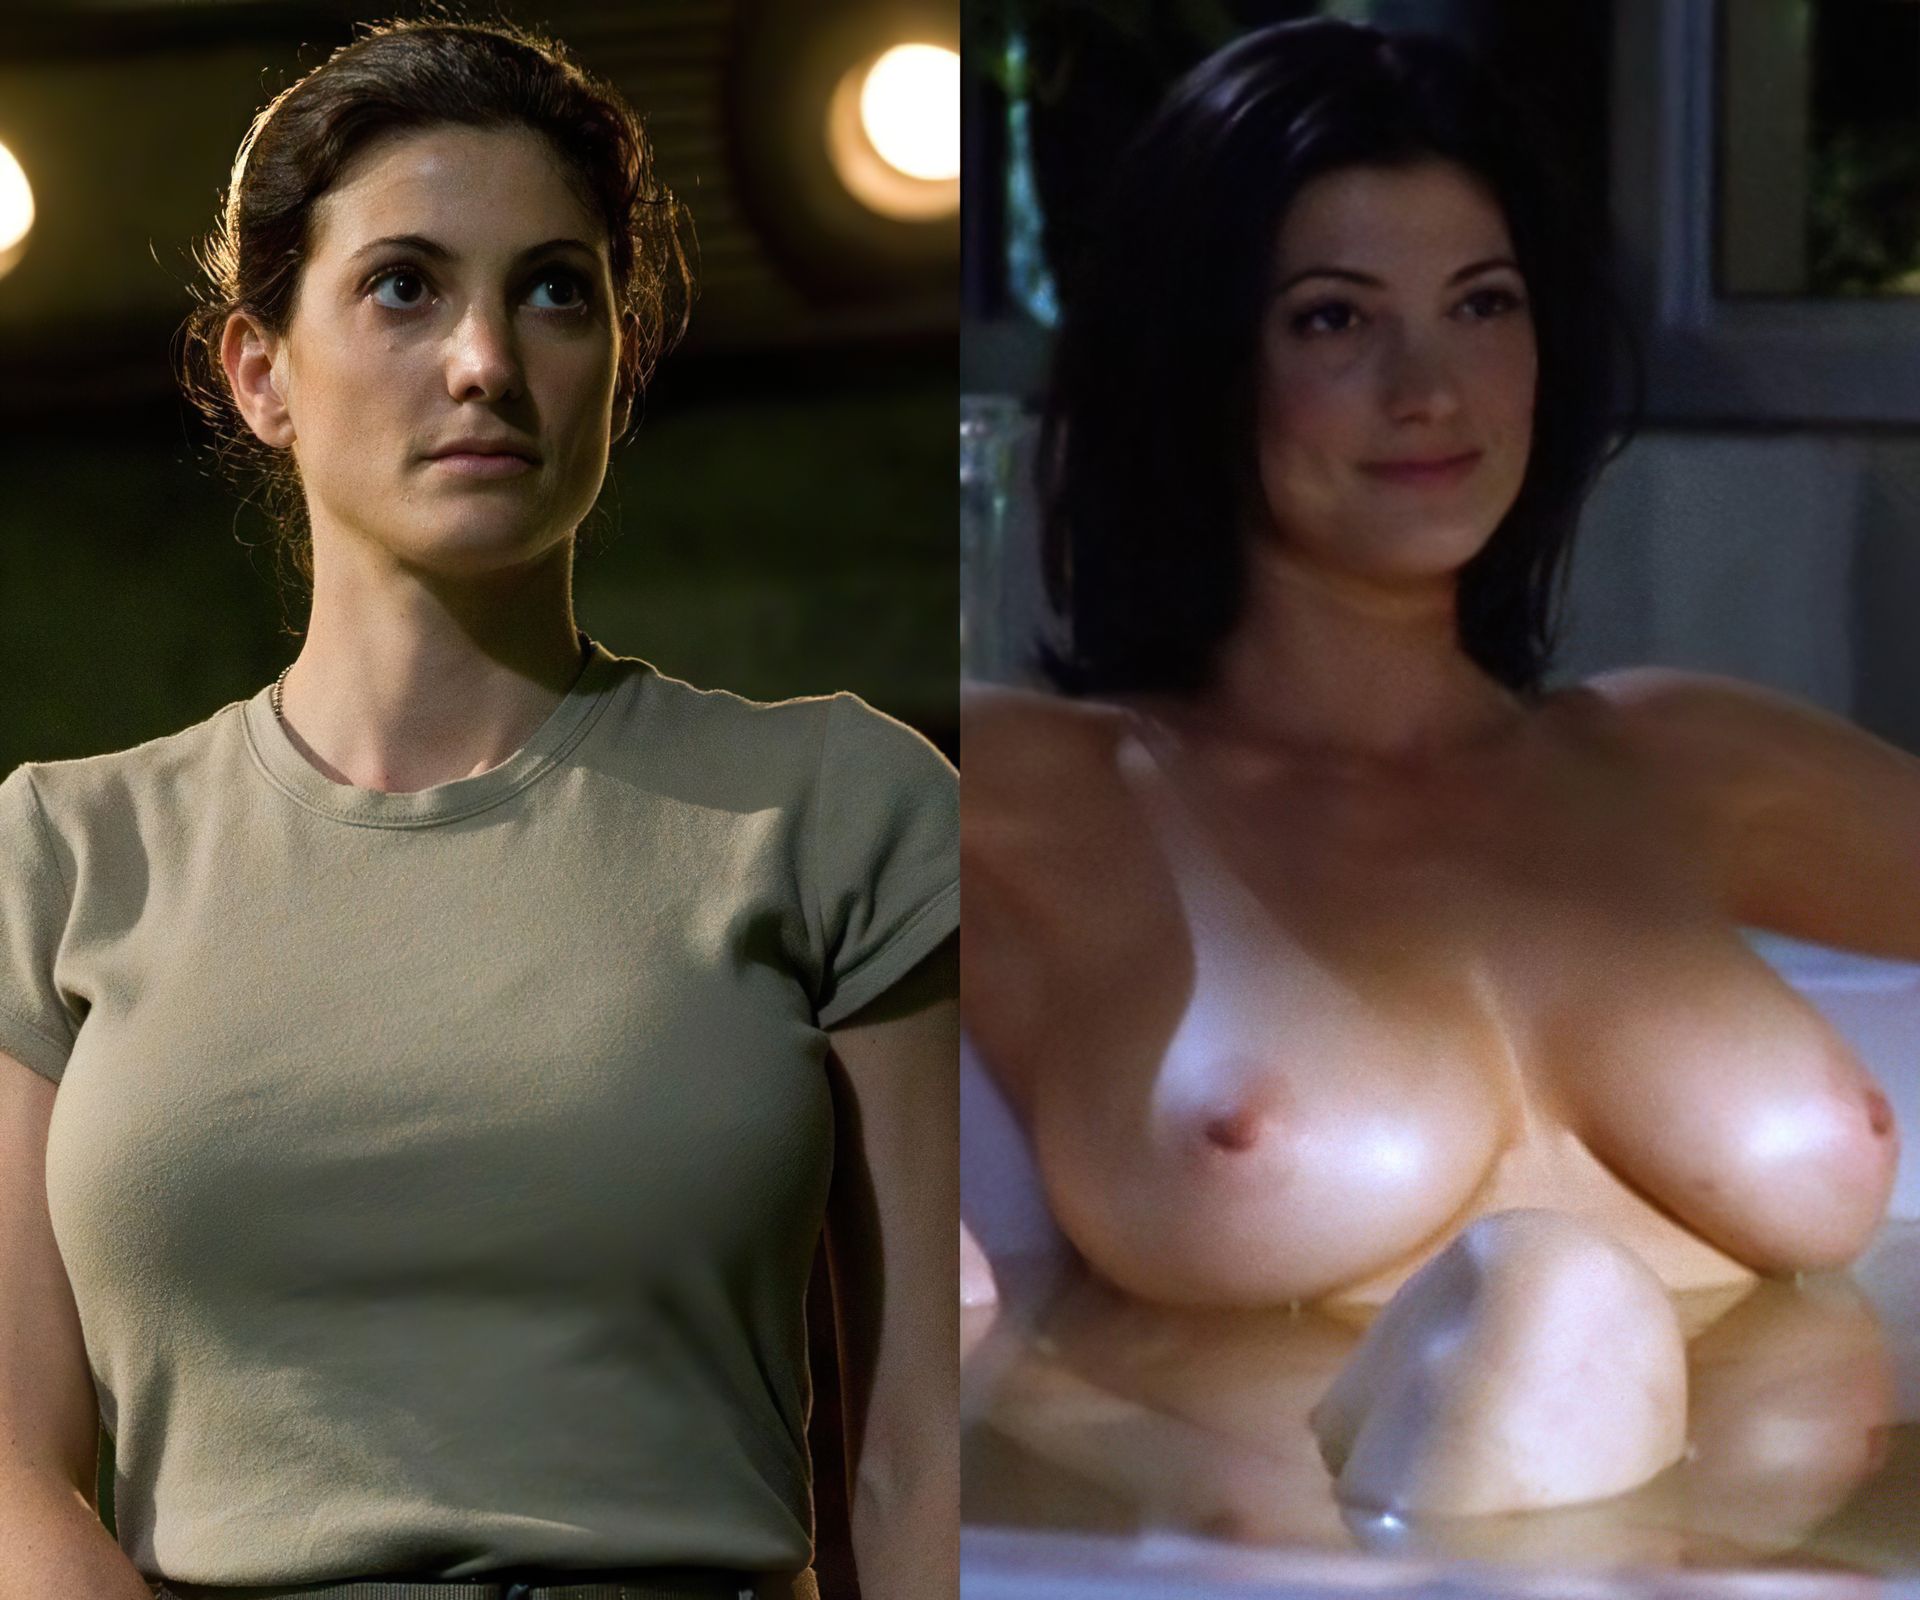 The Most Tempting Celebrity Boobs in One Gallery